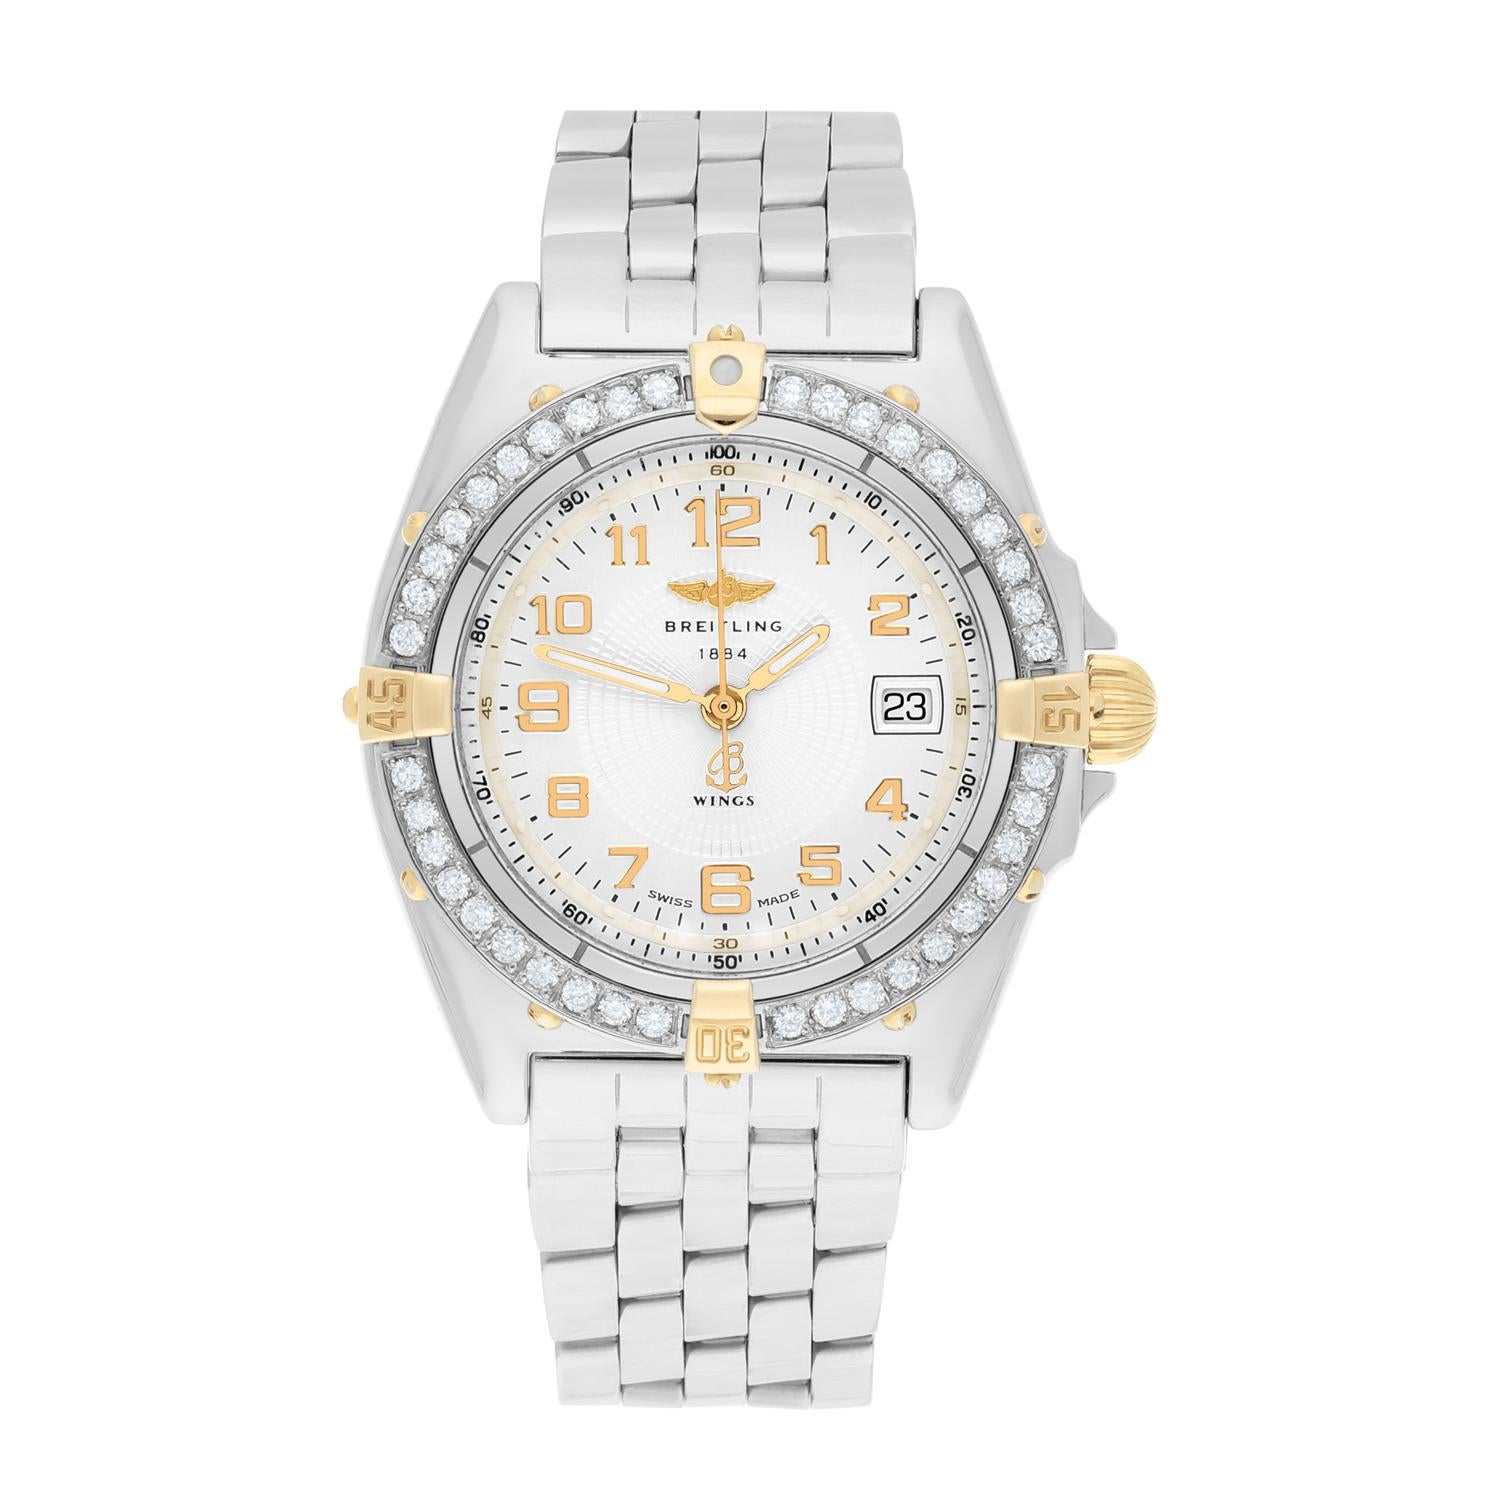 Brand: Breitling 
Series: Wings  
Model: B67050
Case Diameter: 31 mm
Bracelet: Stainless steel
Bezel: Custom diamond set
Dial: Ivory dial
The sale includes a jewelry watch box and an appraisal certificate which states the watch's